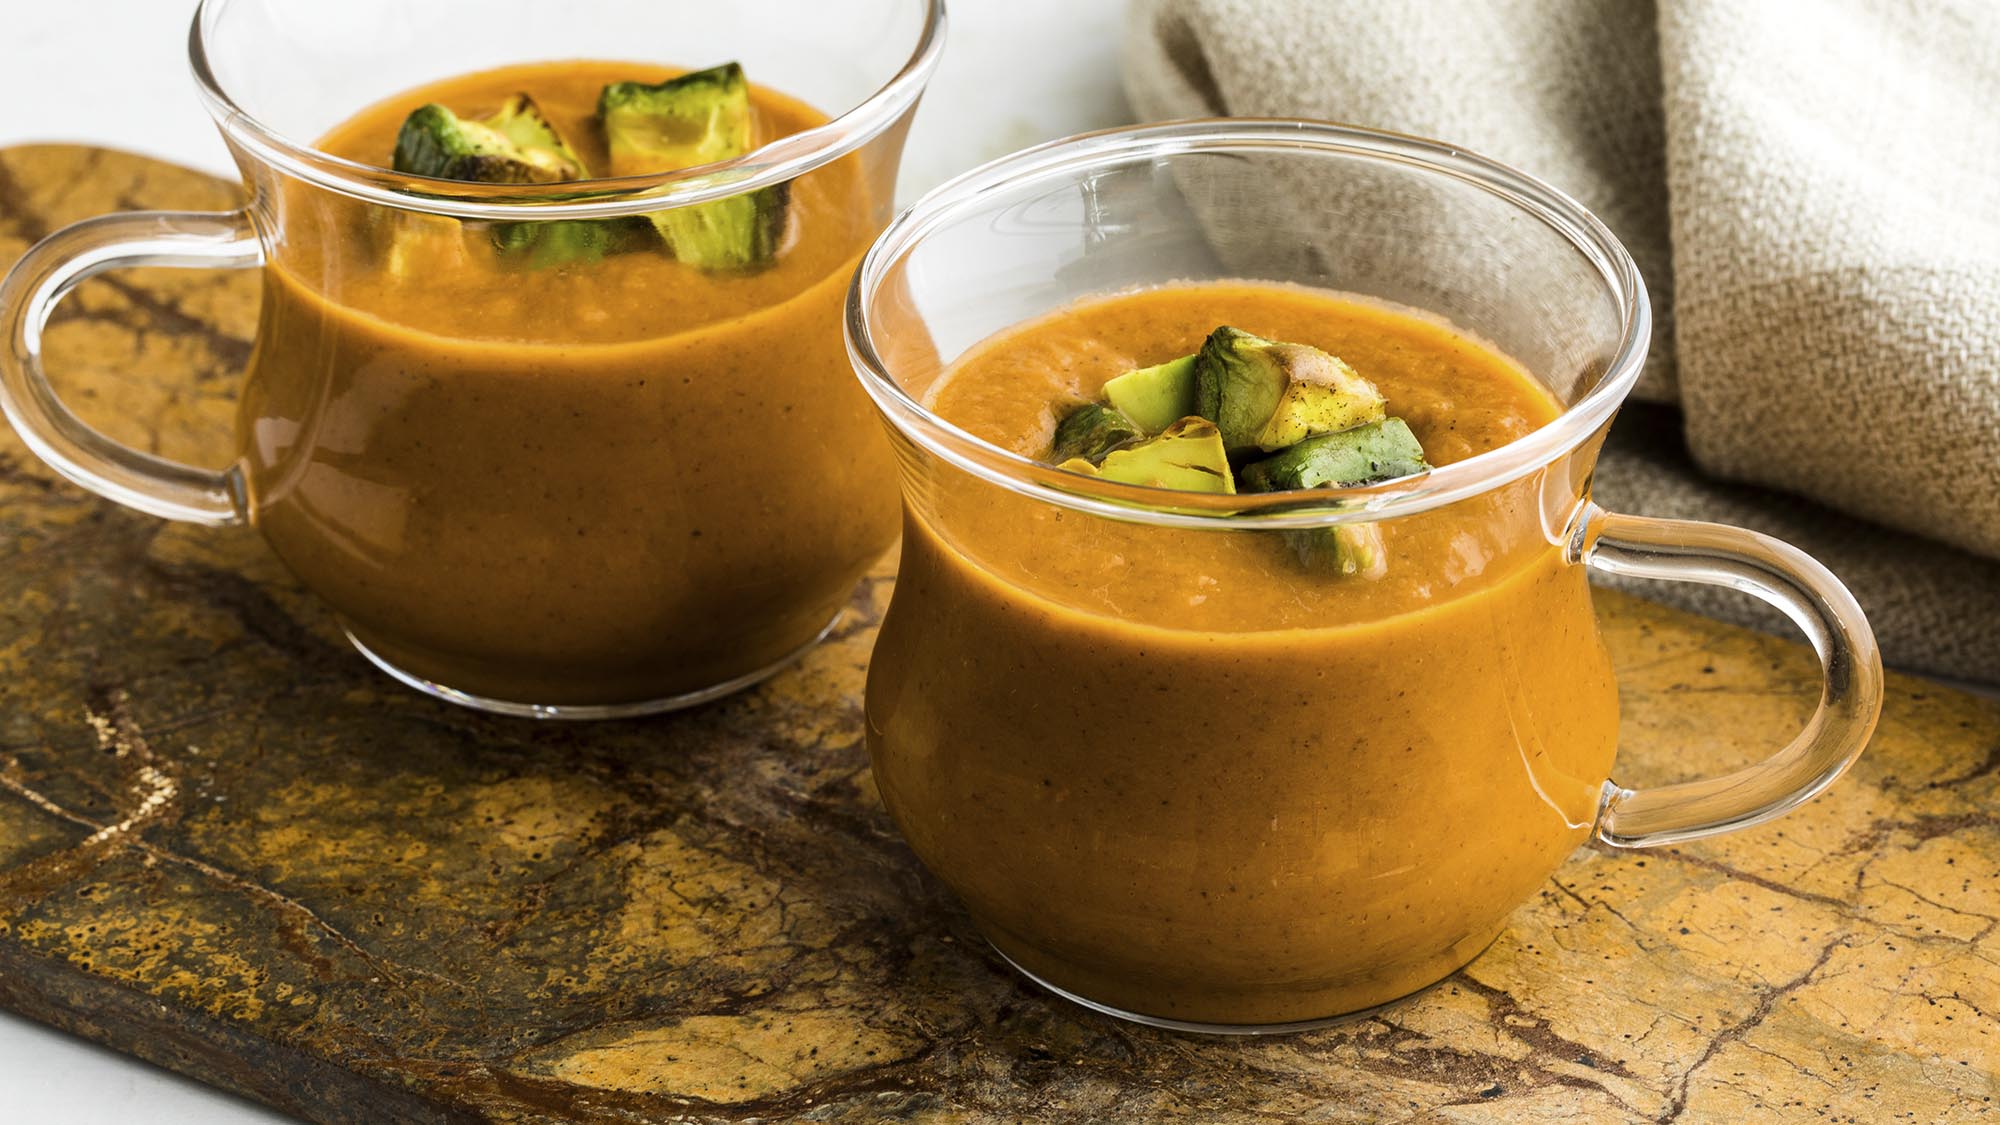 ROASTED VEGETABLE SOUP WITH ROASTED AVOCADO